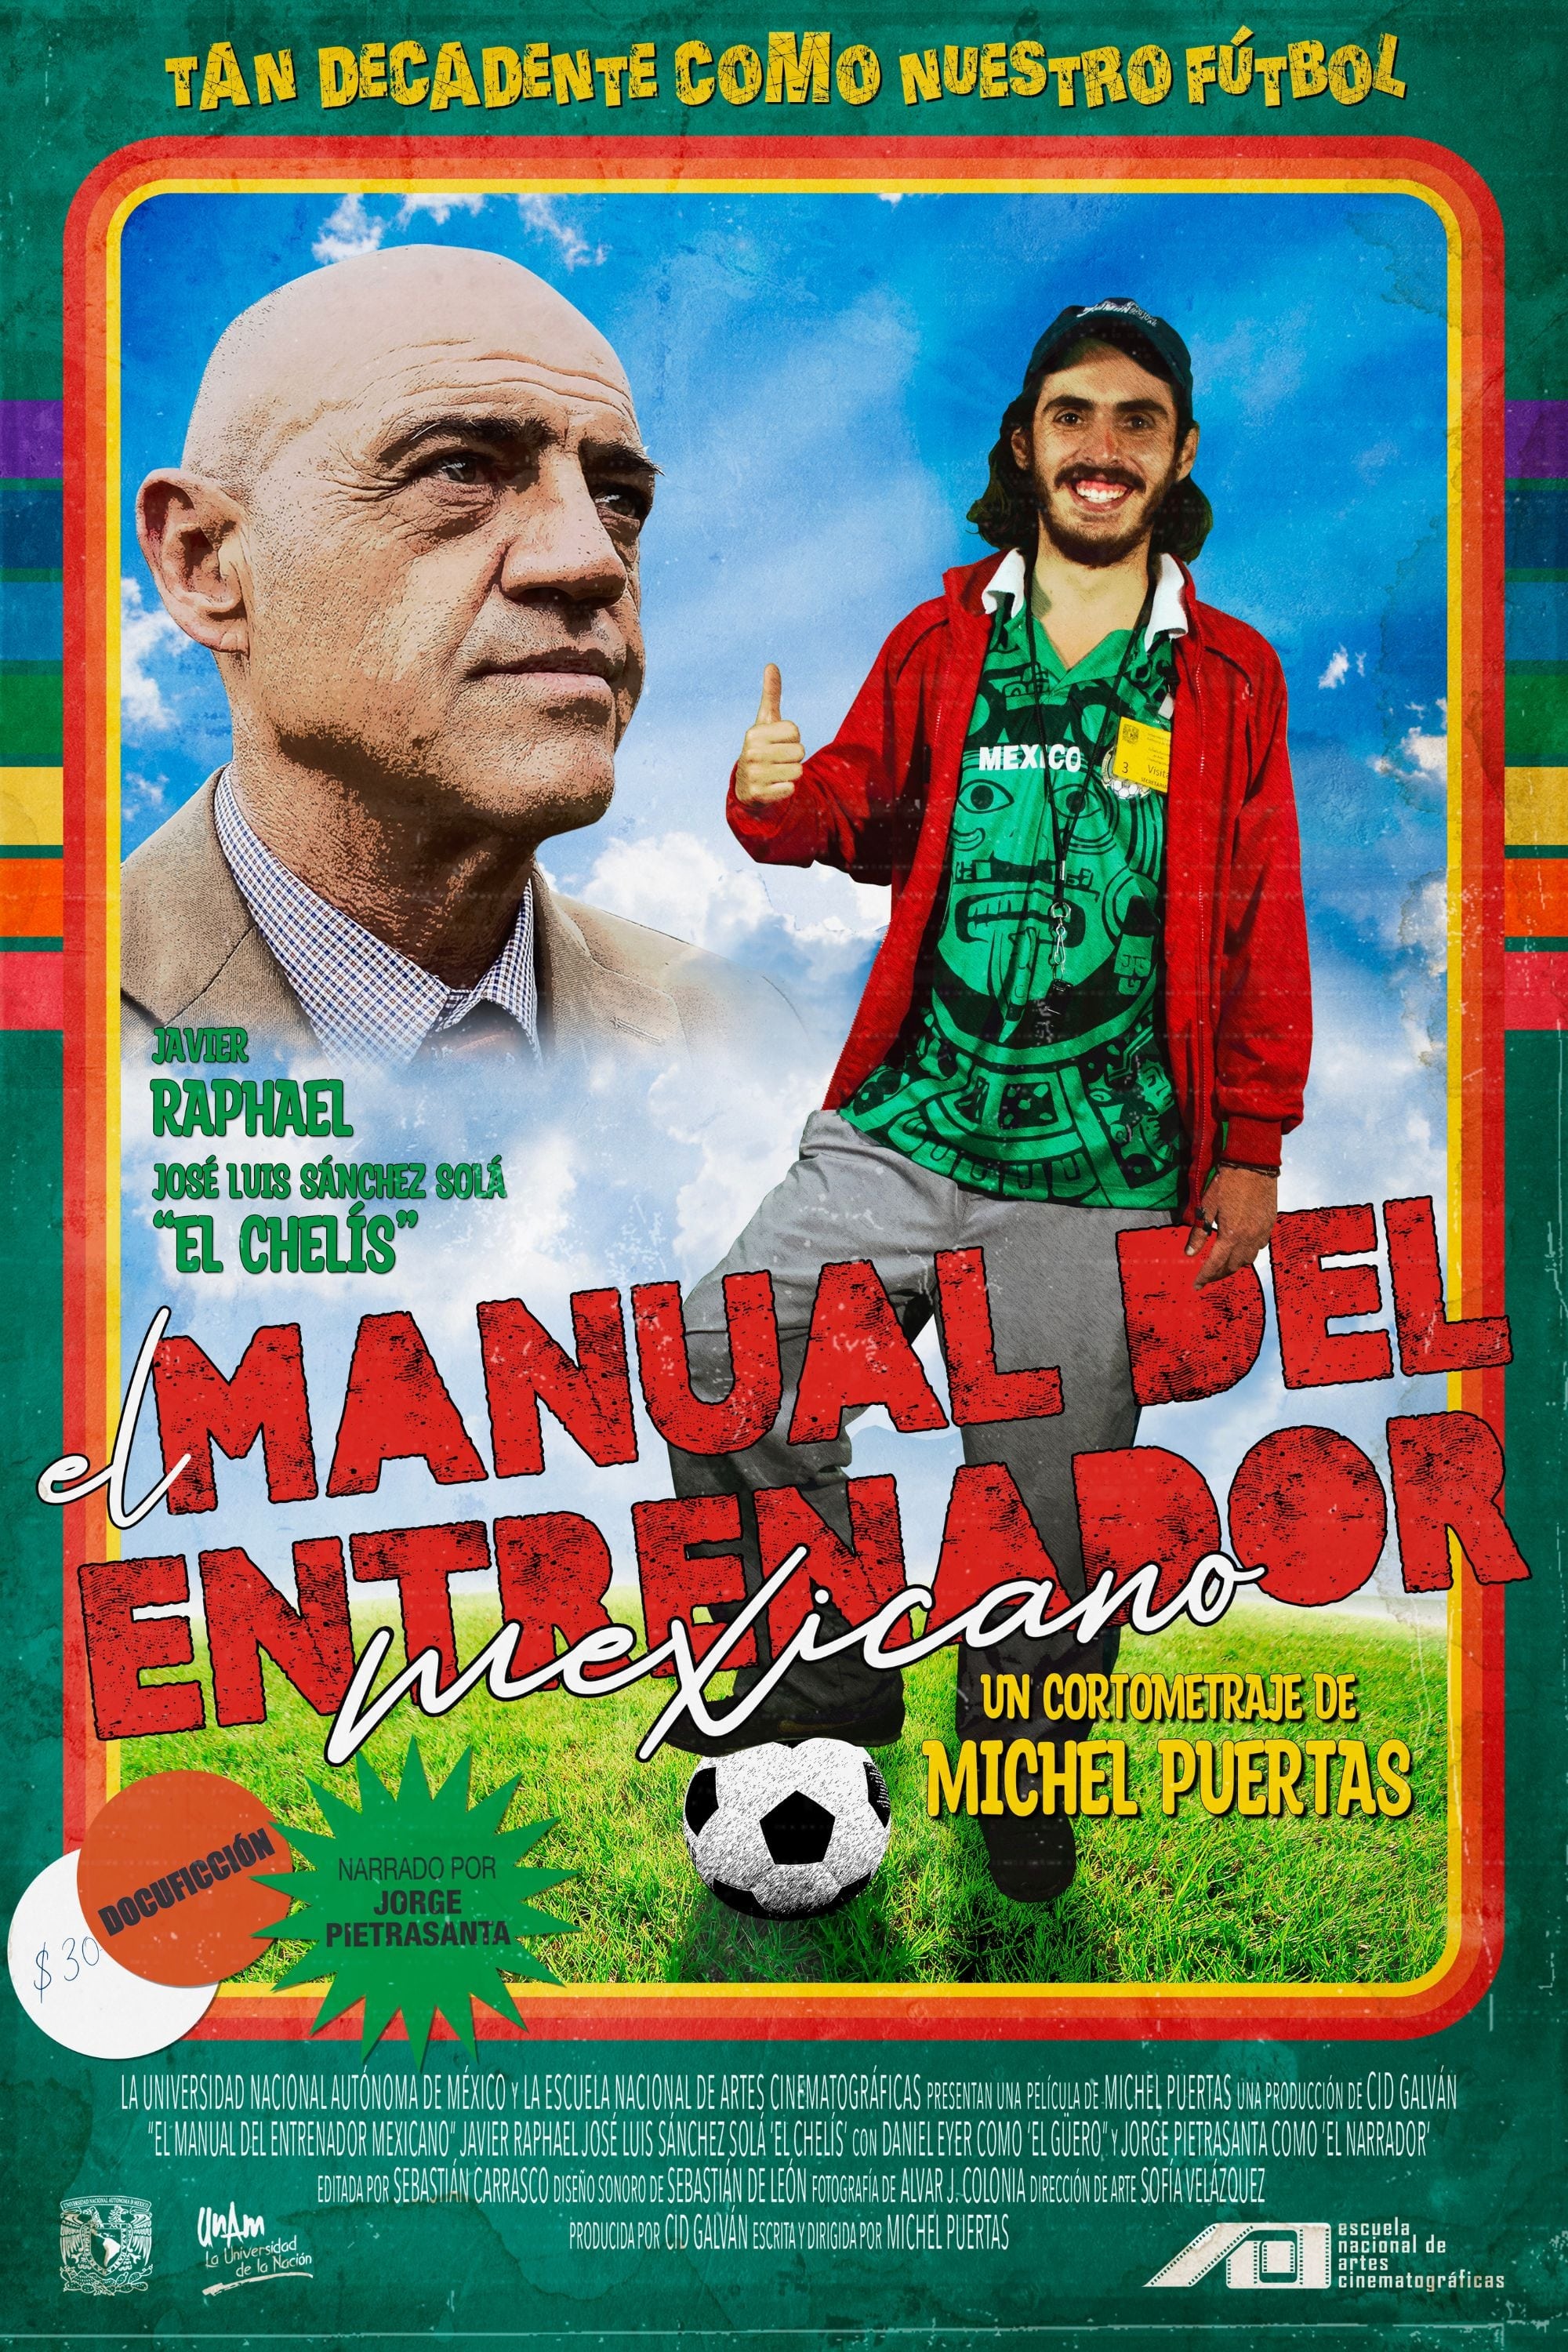 The Mexican Football Coaching Guide